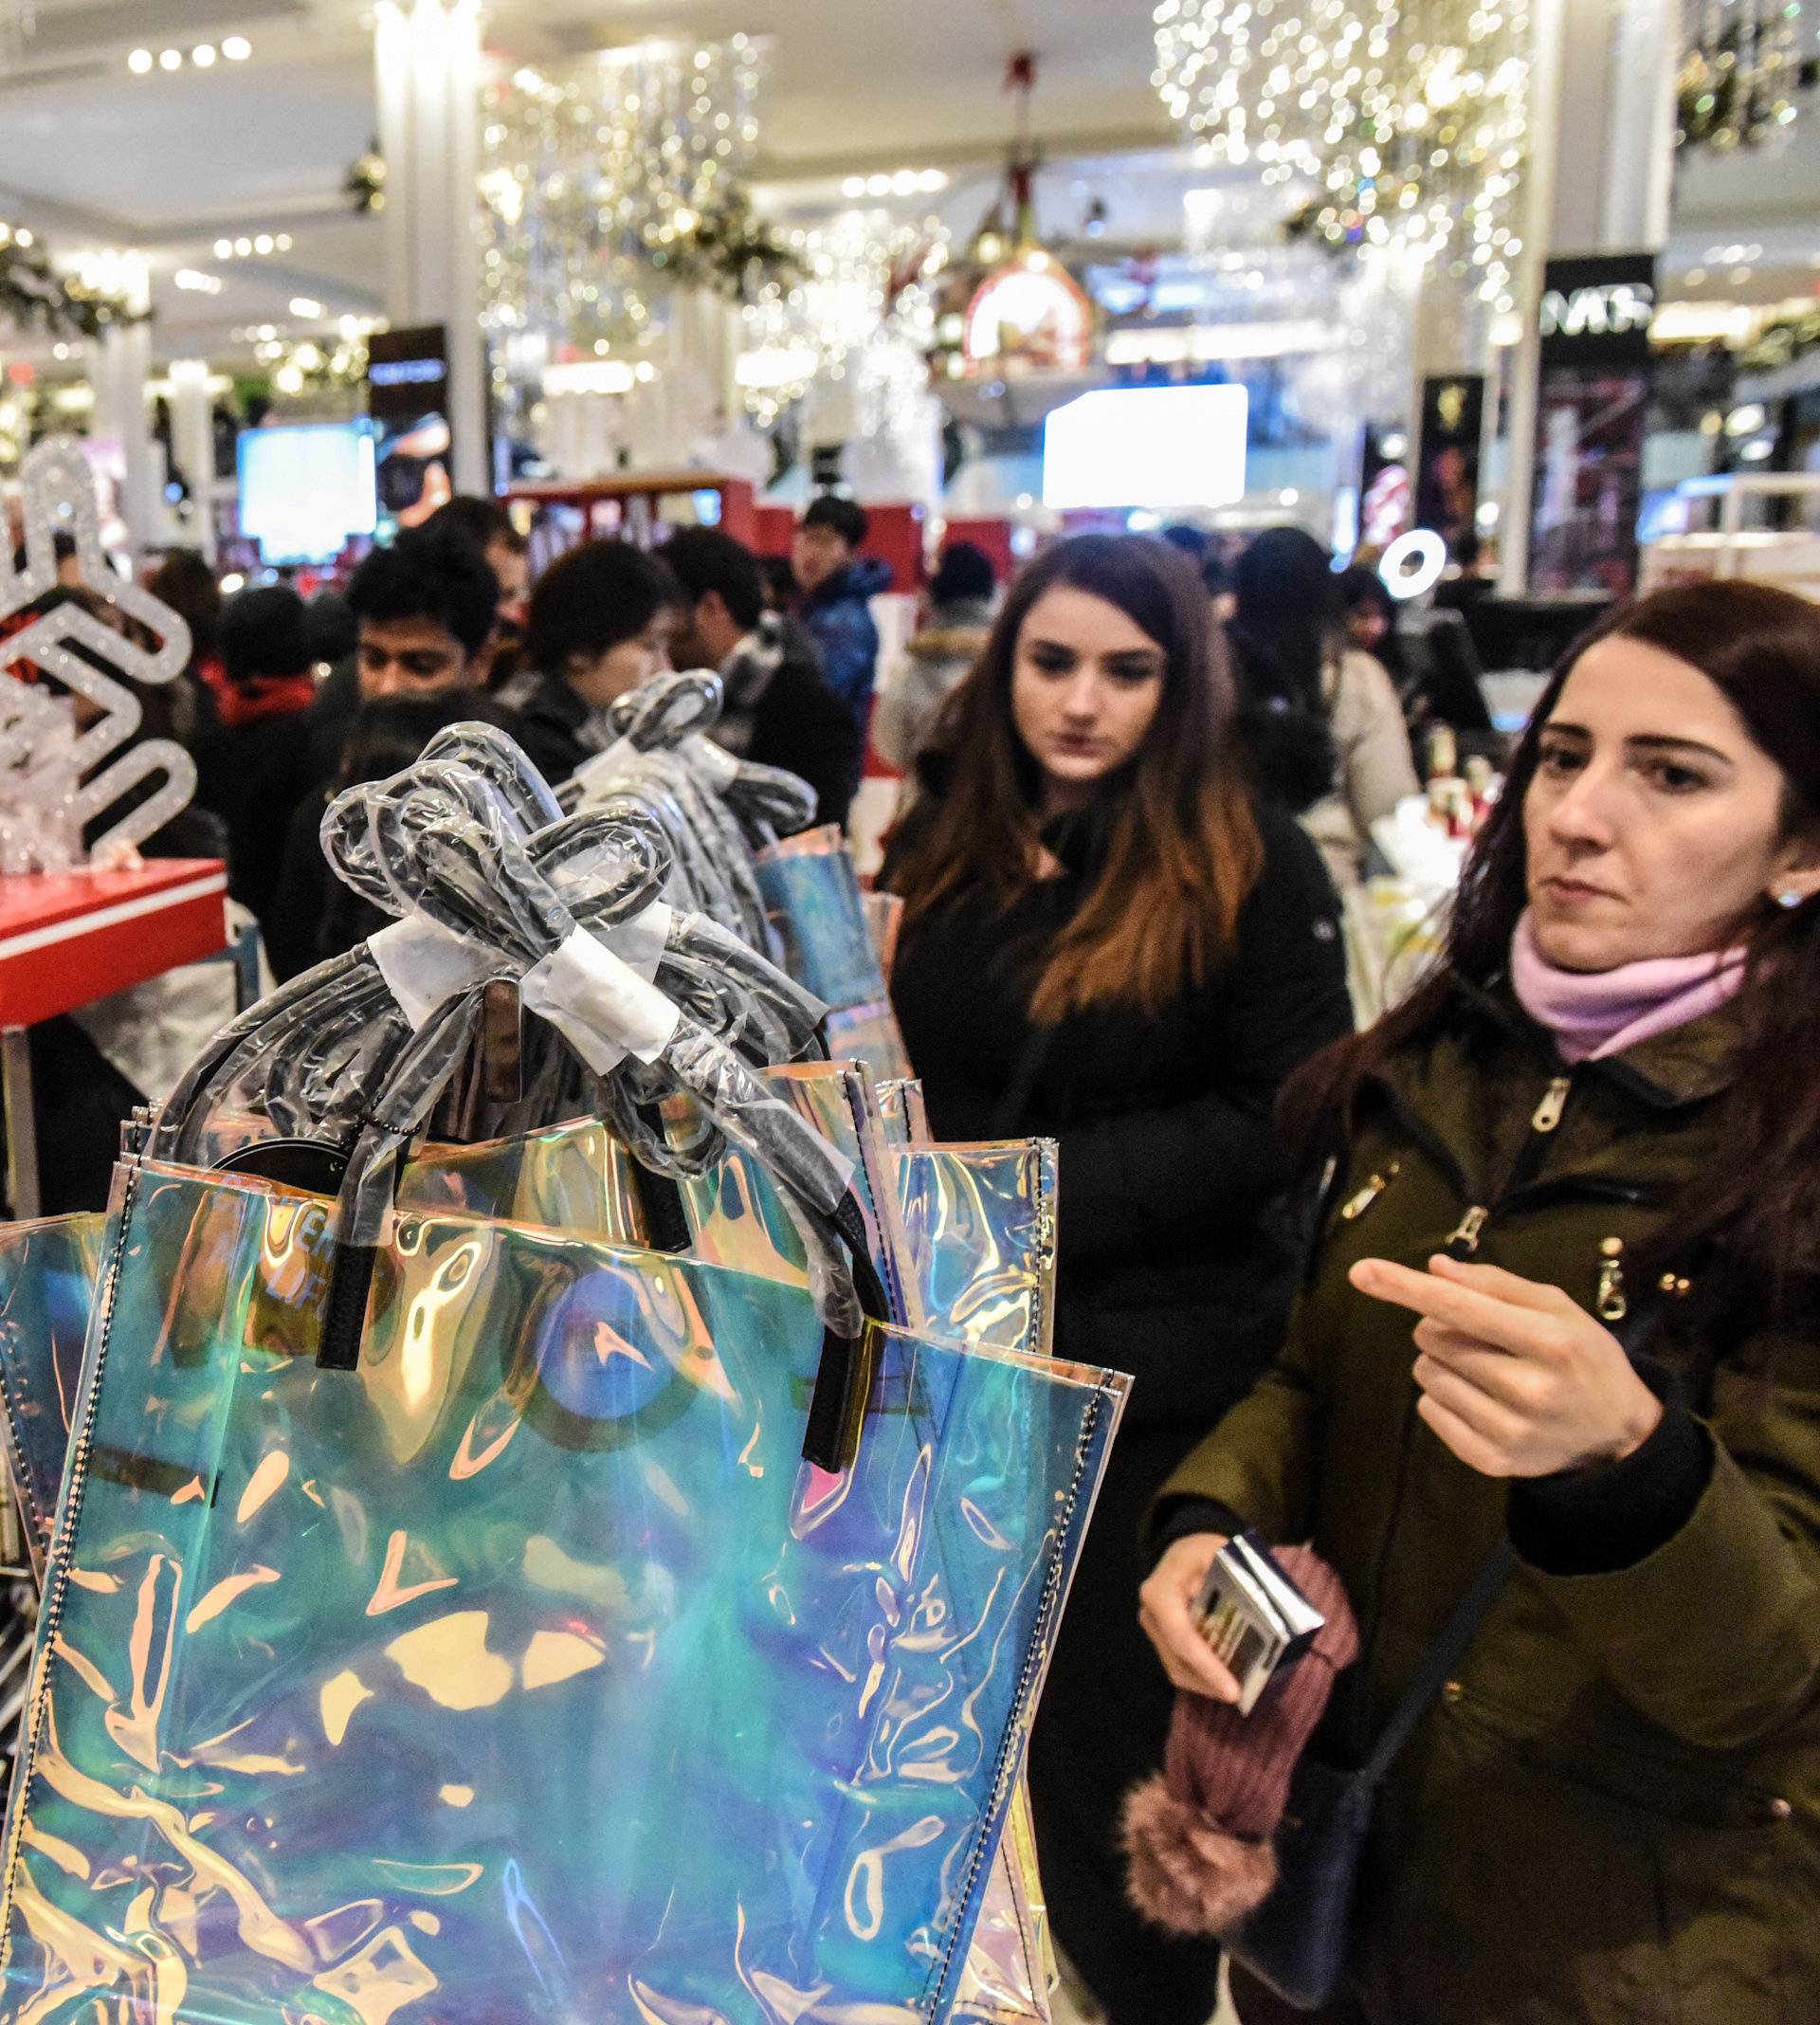 People shop during a Black Friday sales event at Macy's flagship store in New York City